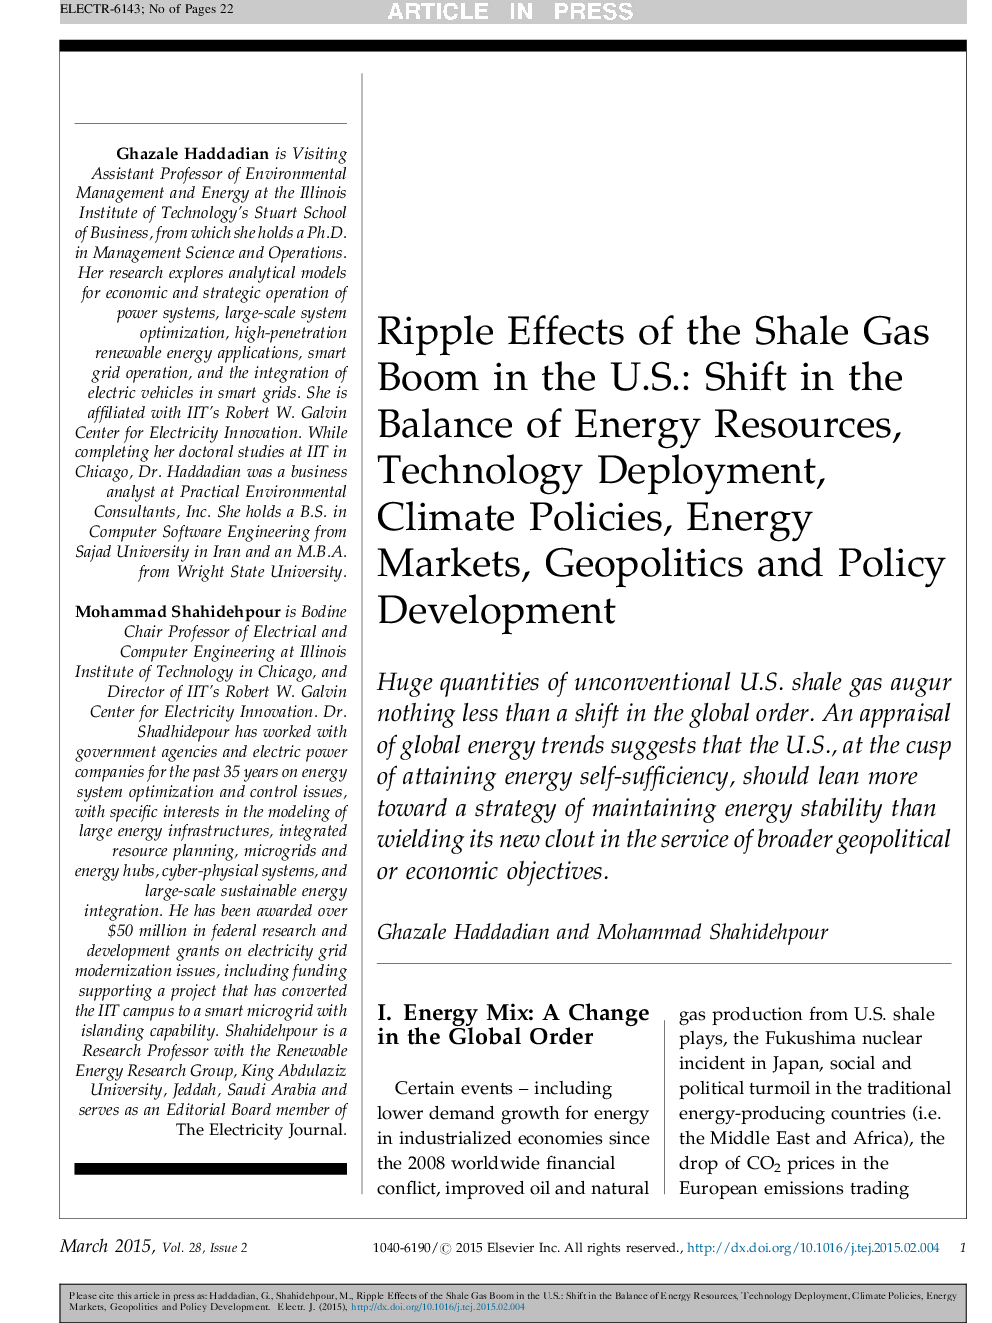 Ripple Effects of the Shale Gas Boom in the U.S.: Shift in the Balance of Energy Resources, Technology Deployment, Climate Policies, Energy Markets, Geopolitics and Policy Development